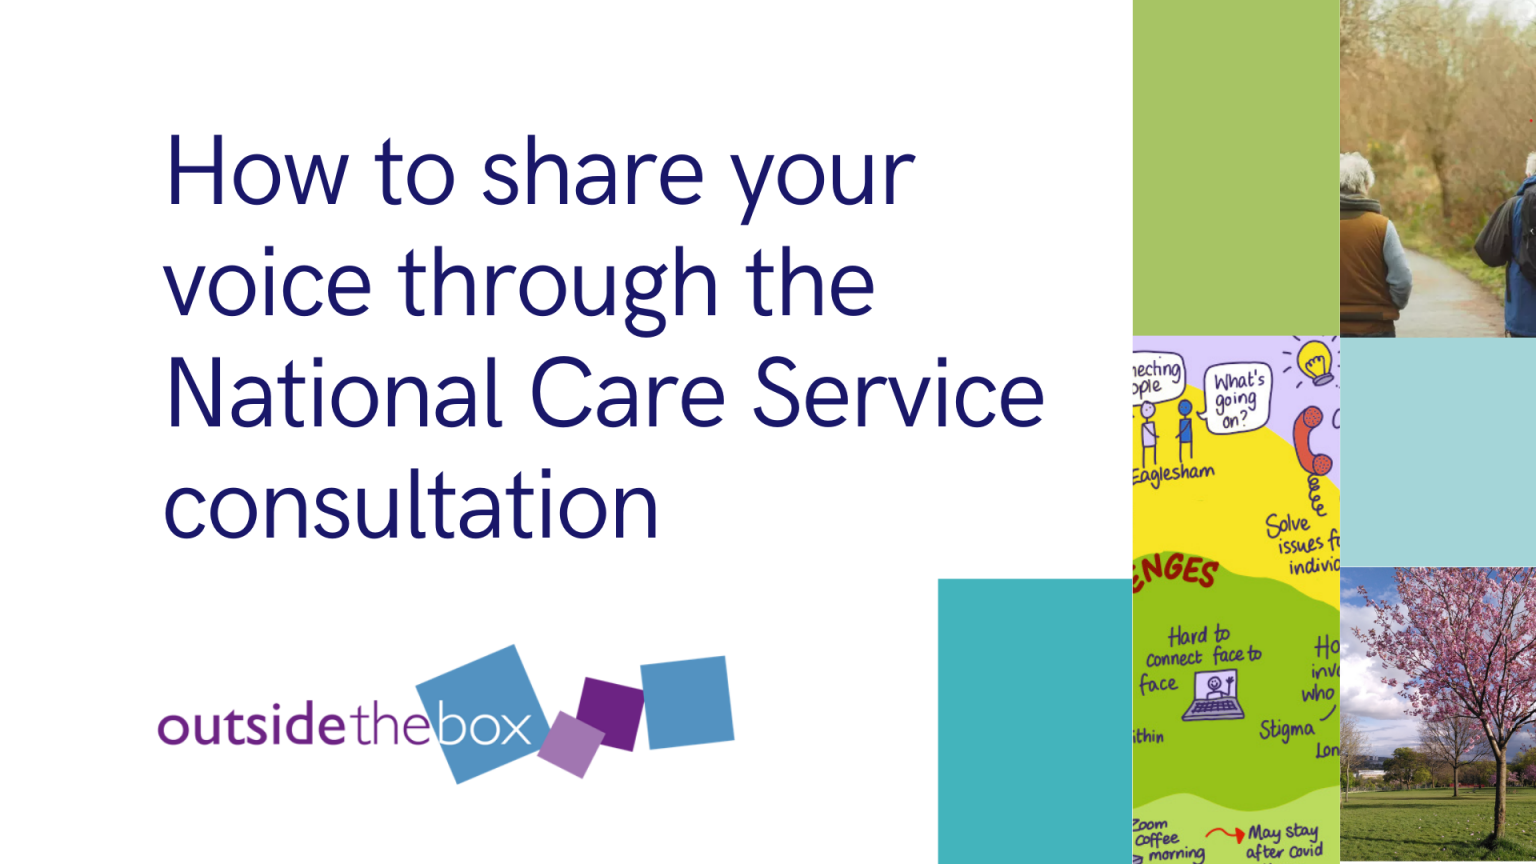 How to share your voice through the National Care Service consultation